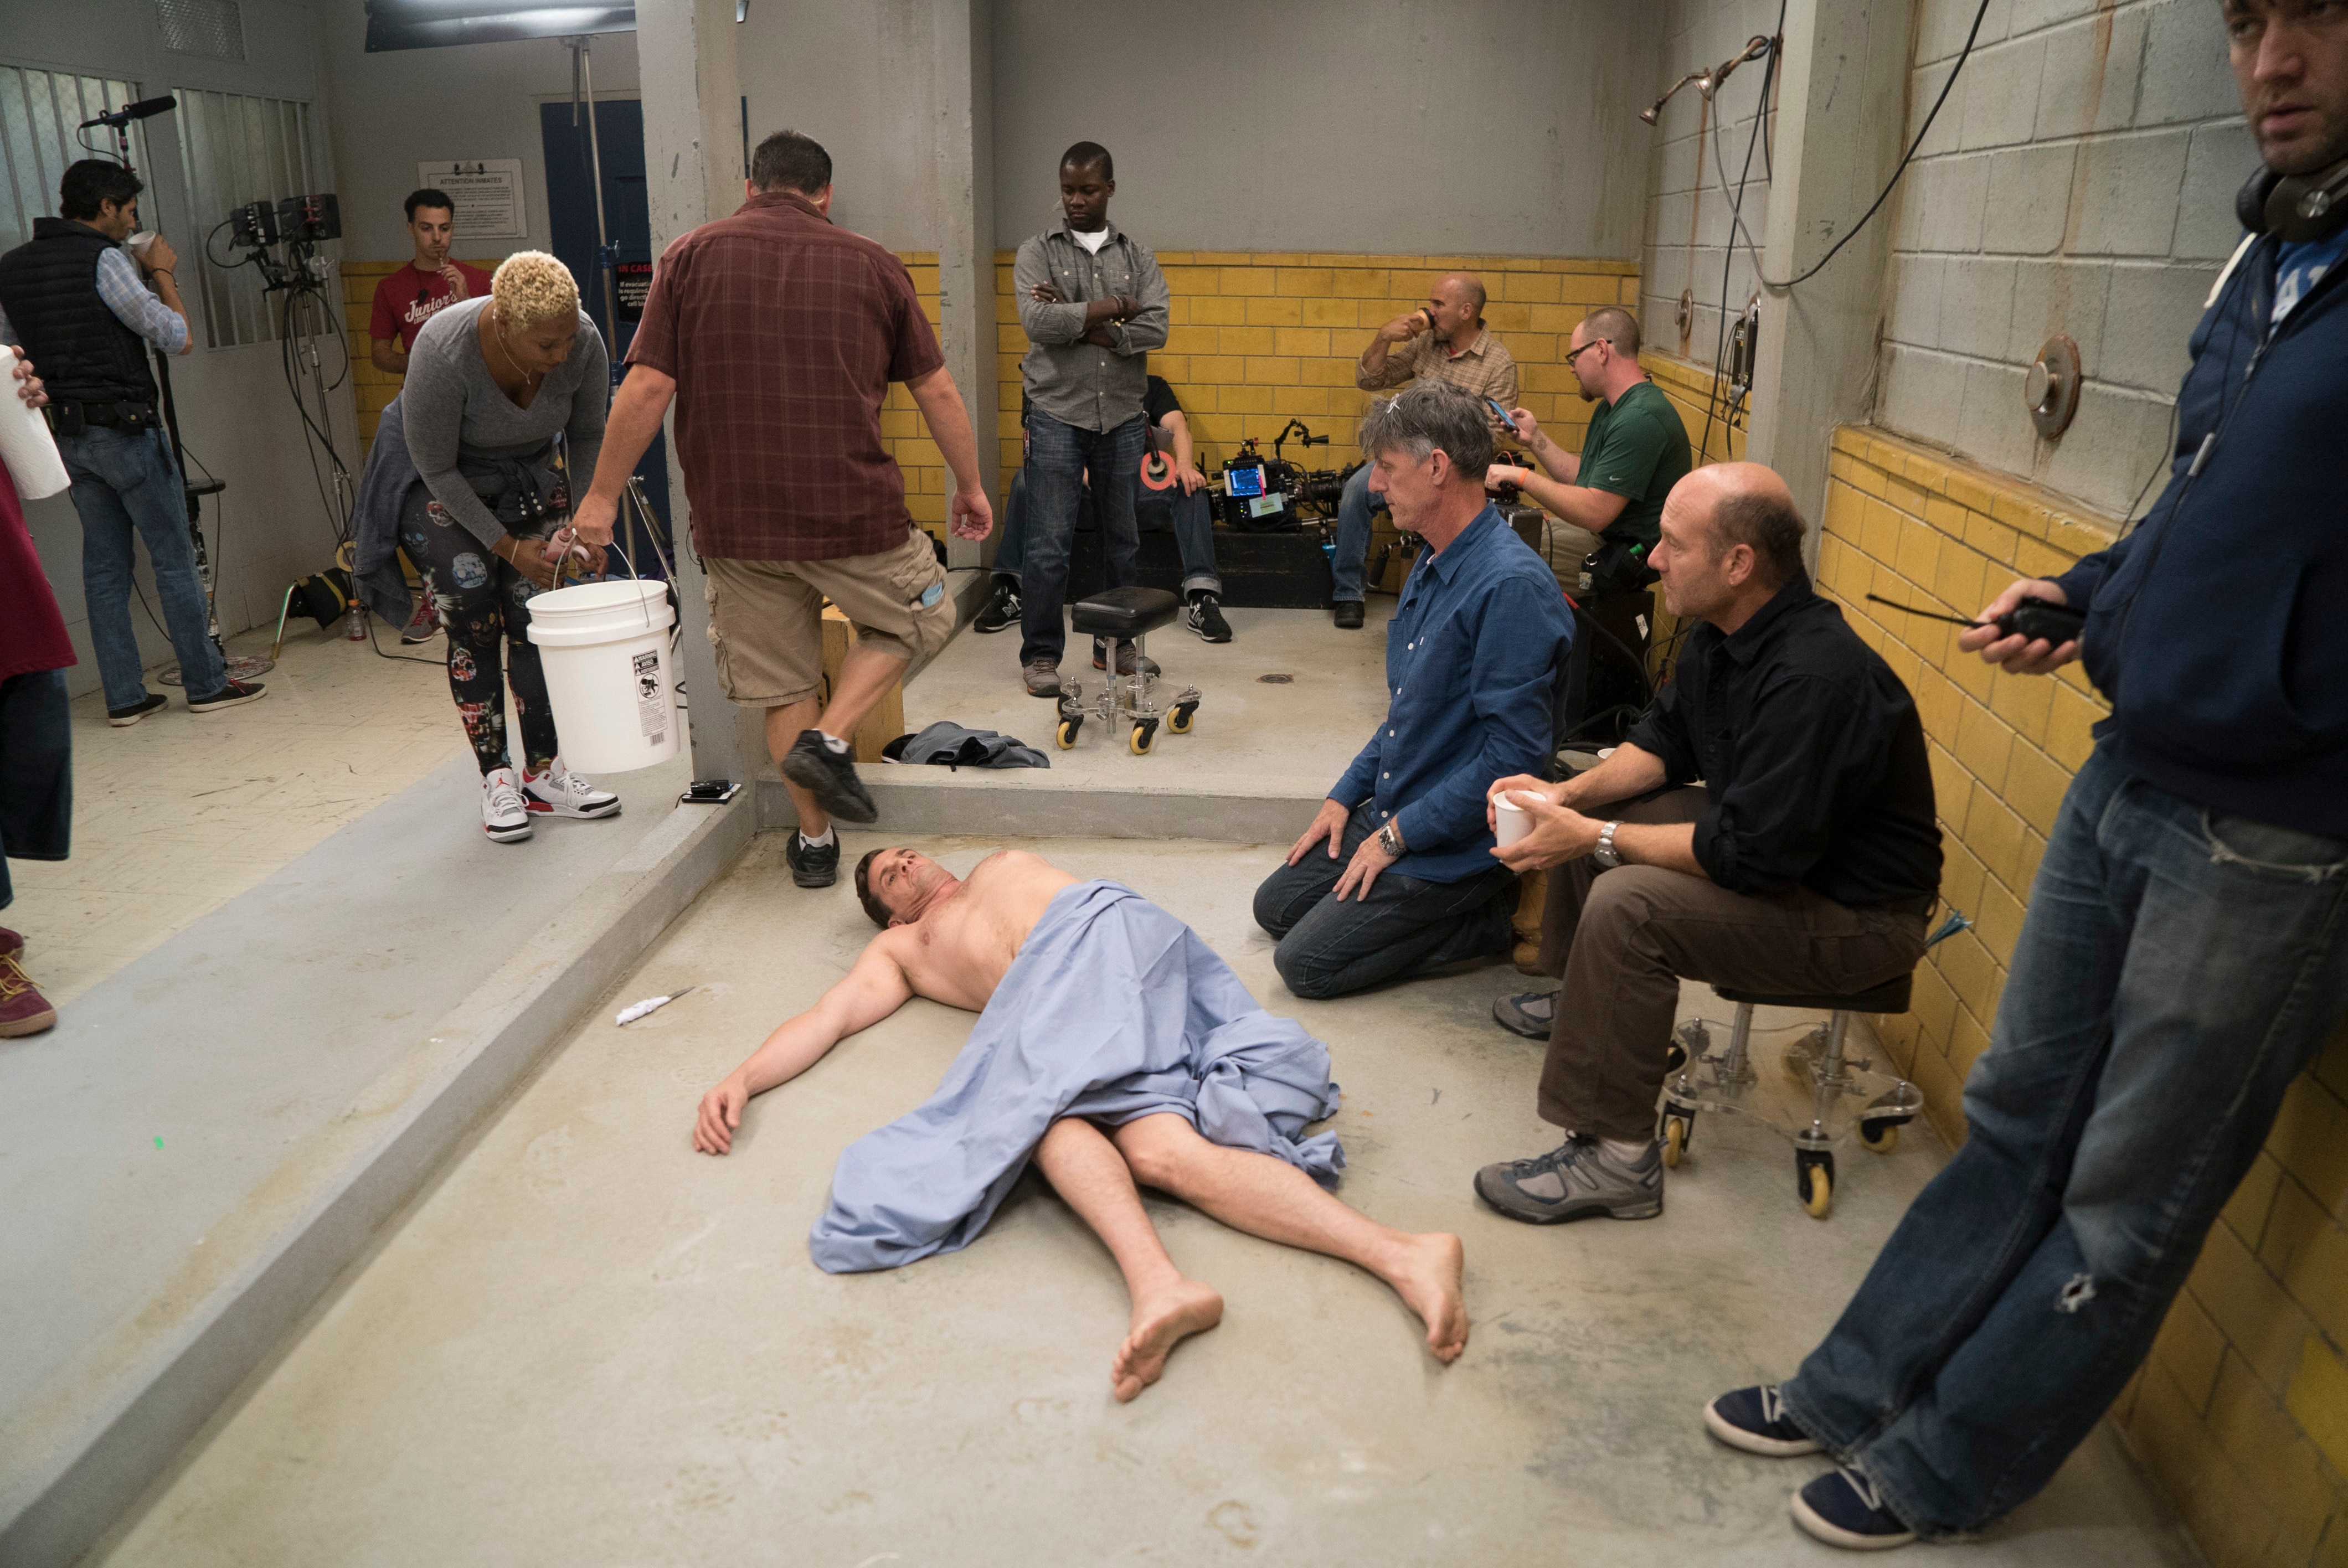 Law And Order Special Victims Unit Behind The Scenes Of Chicago Crossover Photo 2045206